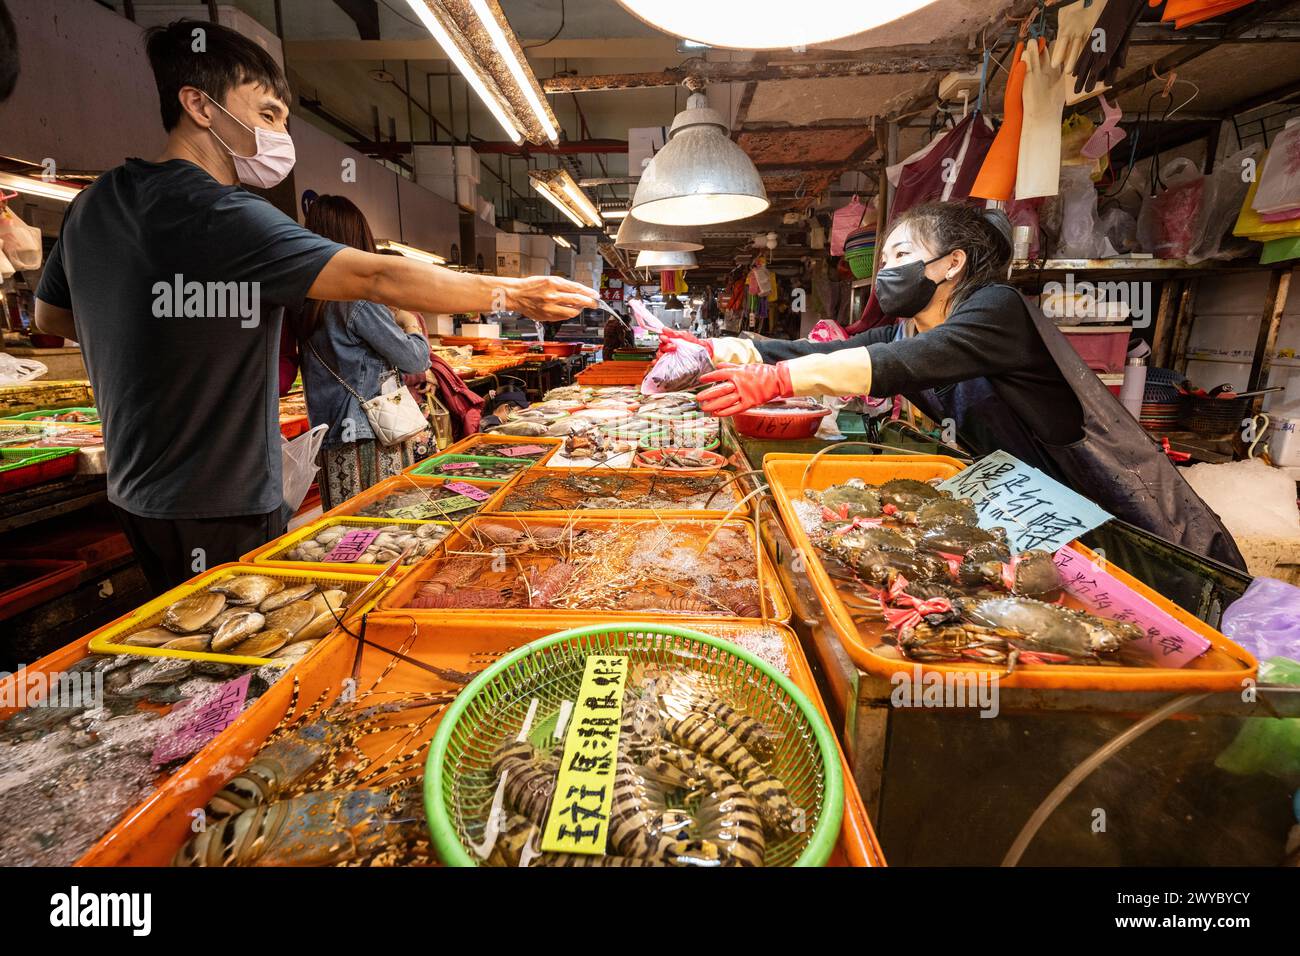 A transaction unfolds as fresh seafood is exchanged at a lively market Stock Photo